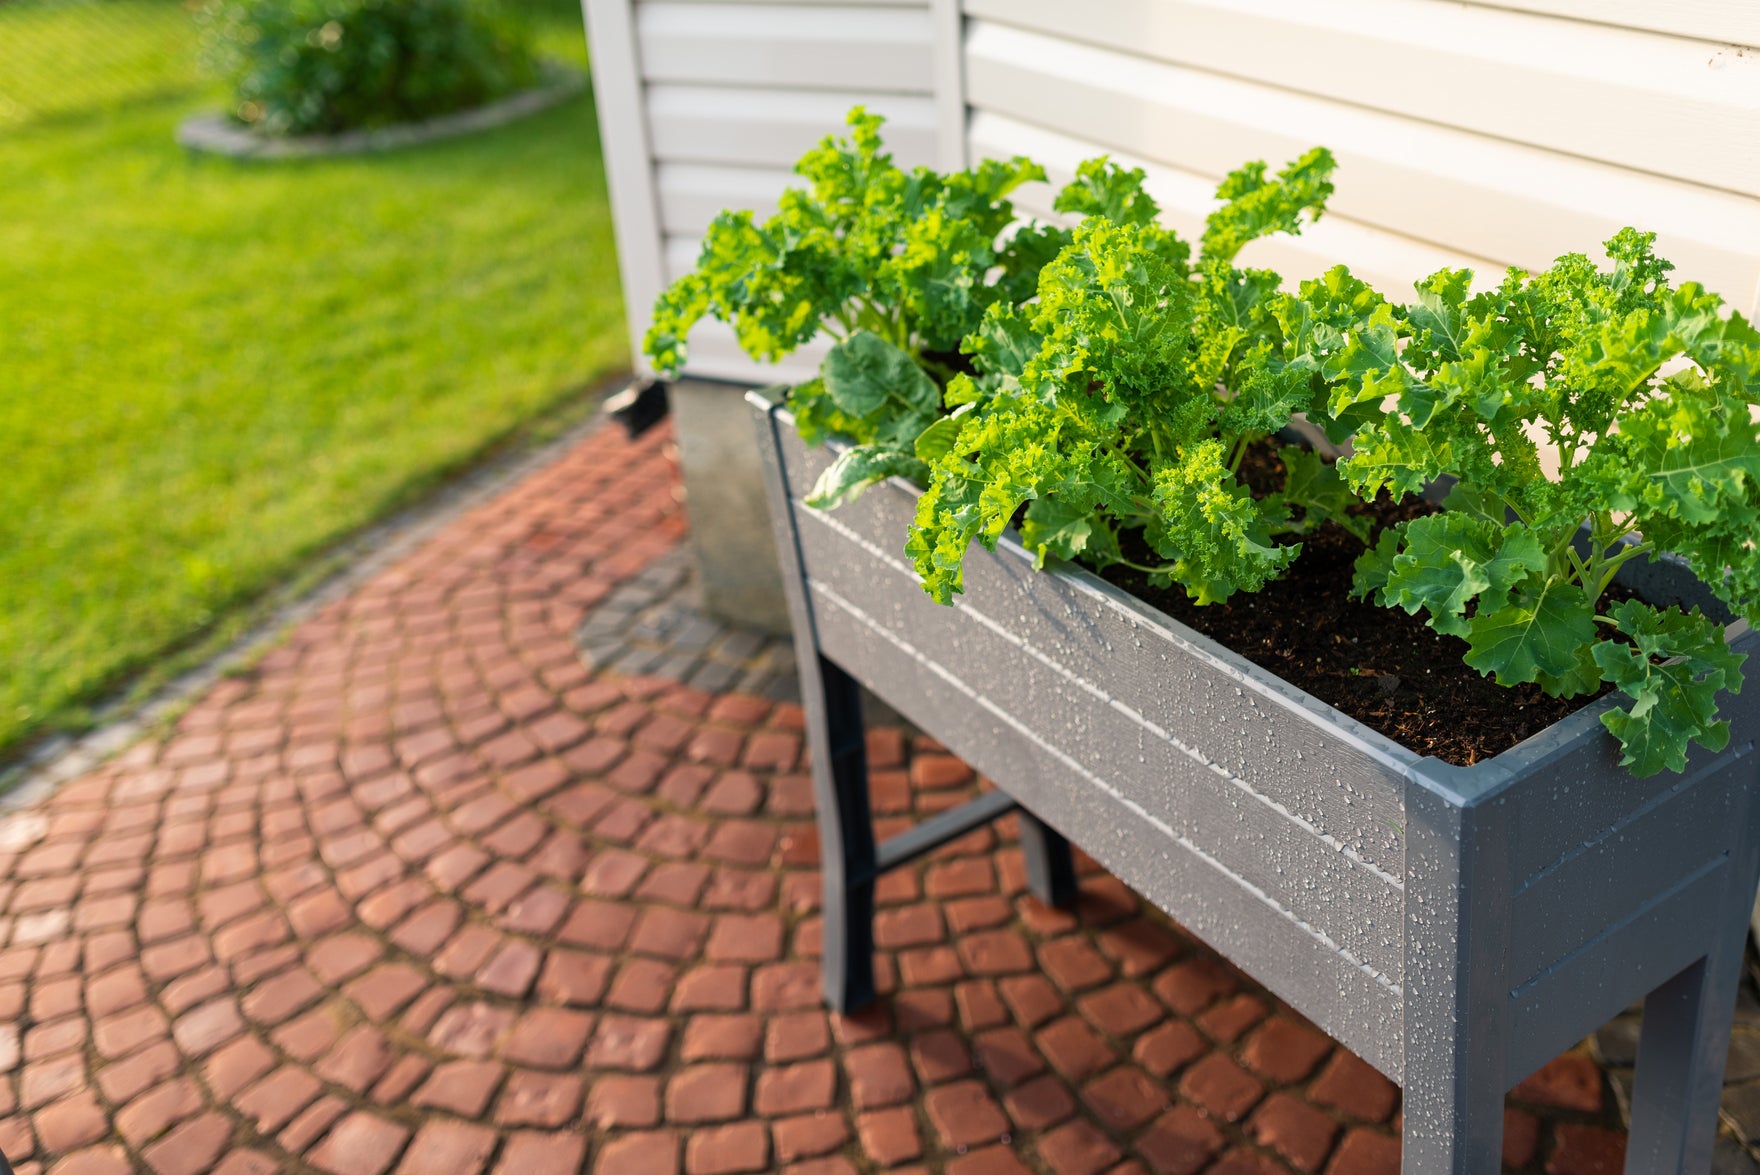 What is a planter box, and why would I want one in my garden?